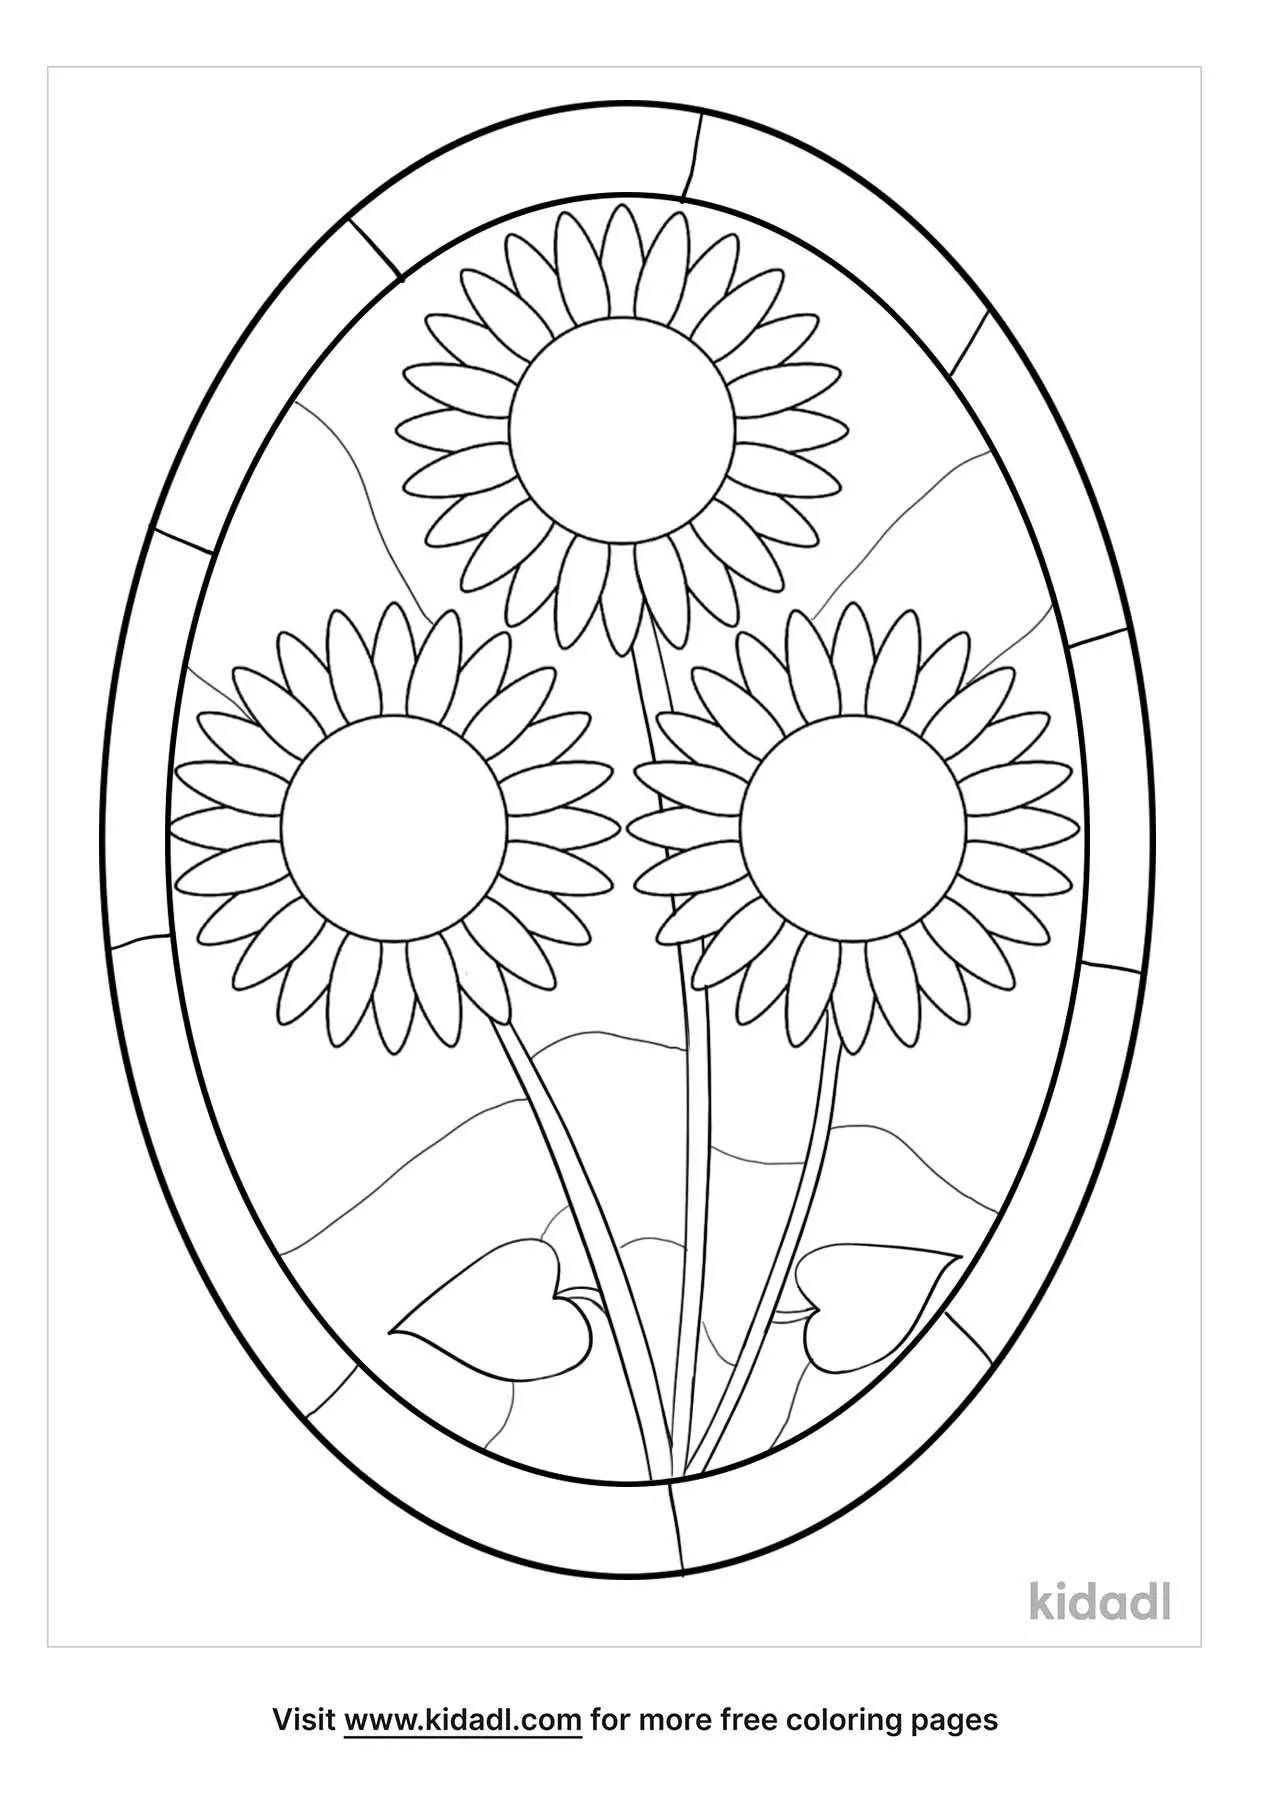 Free stained glass sunflowers coloring page coloring page printables